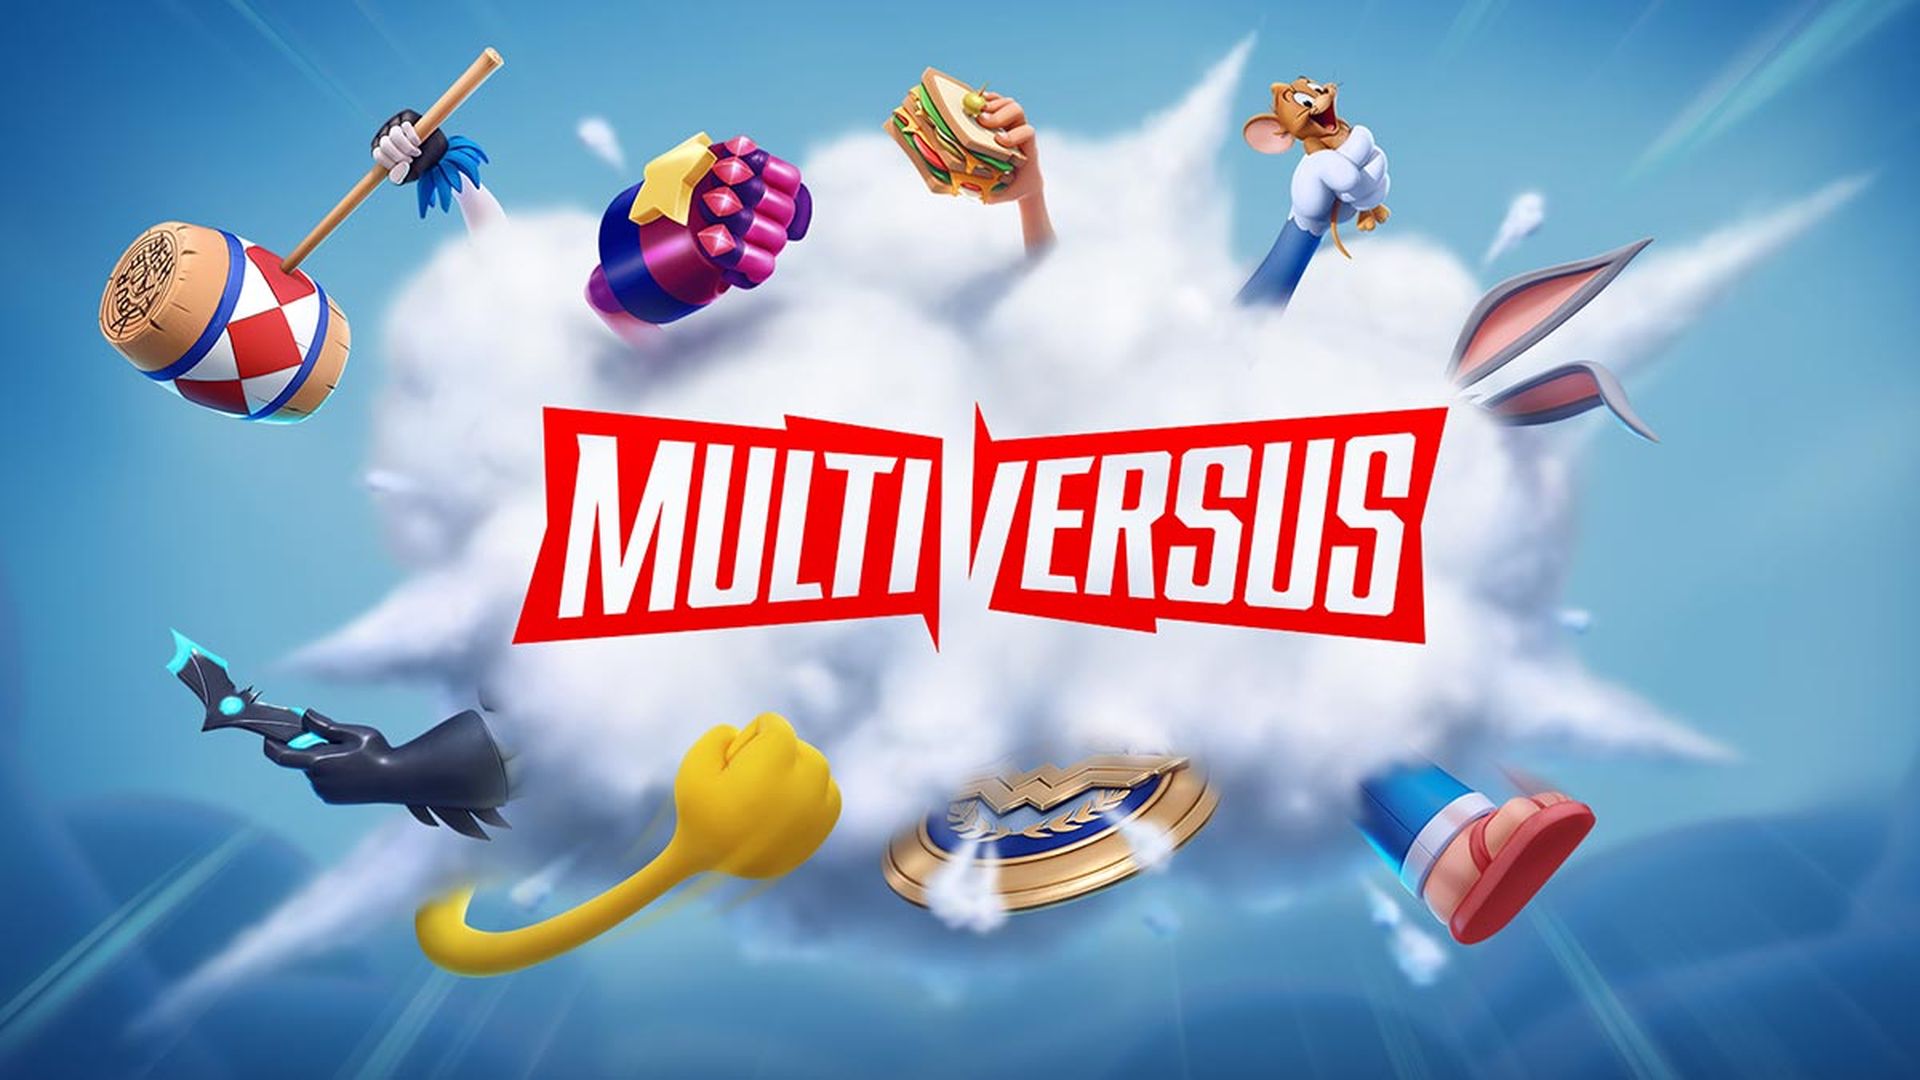 In this article, we will cover how to get MultiVersus for free and answer some questions like 